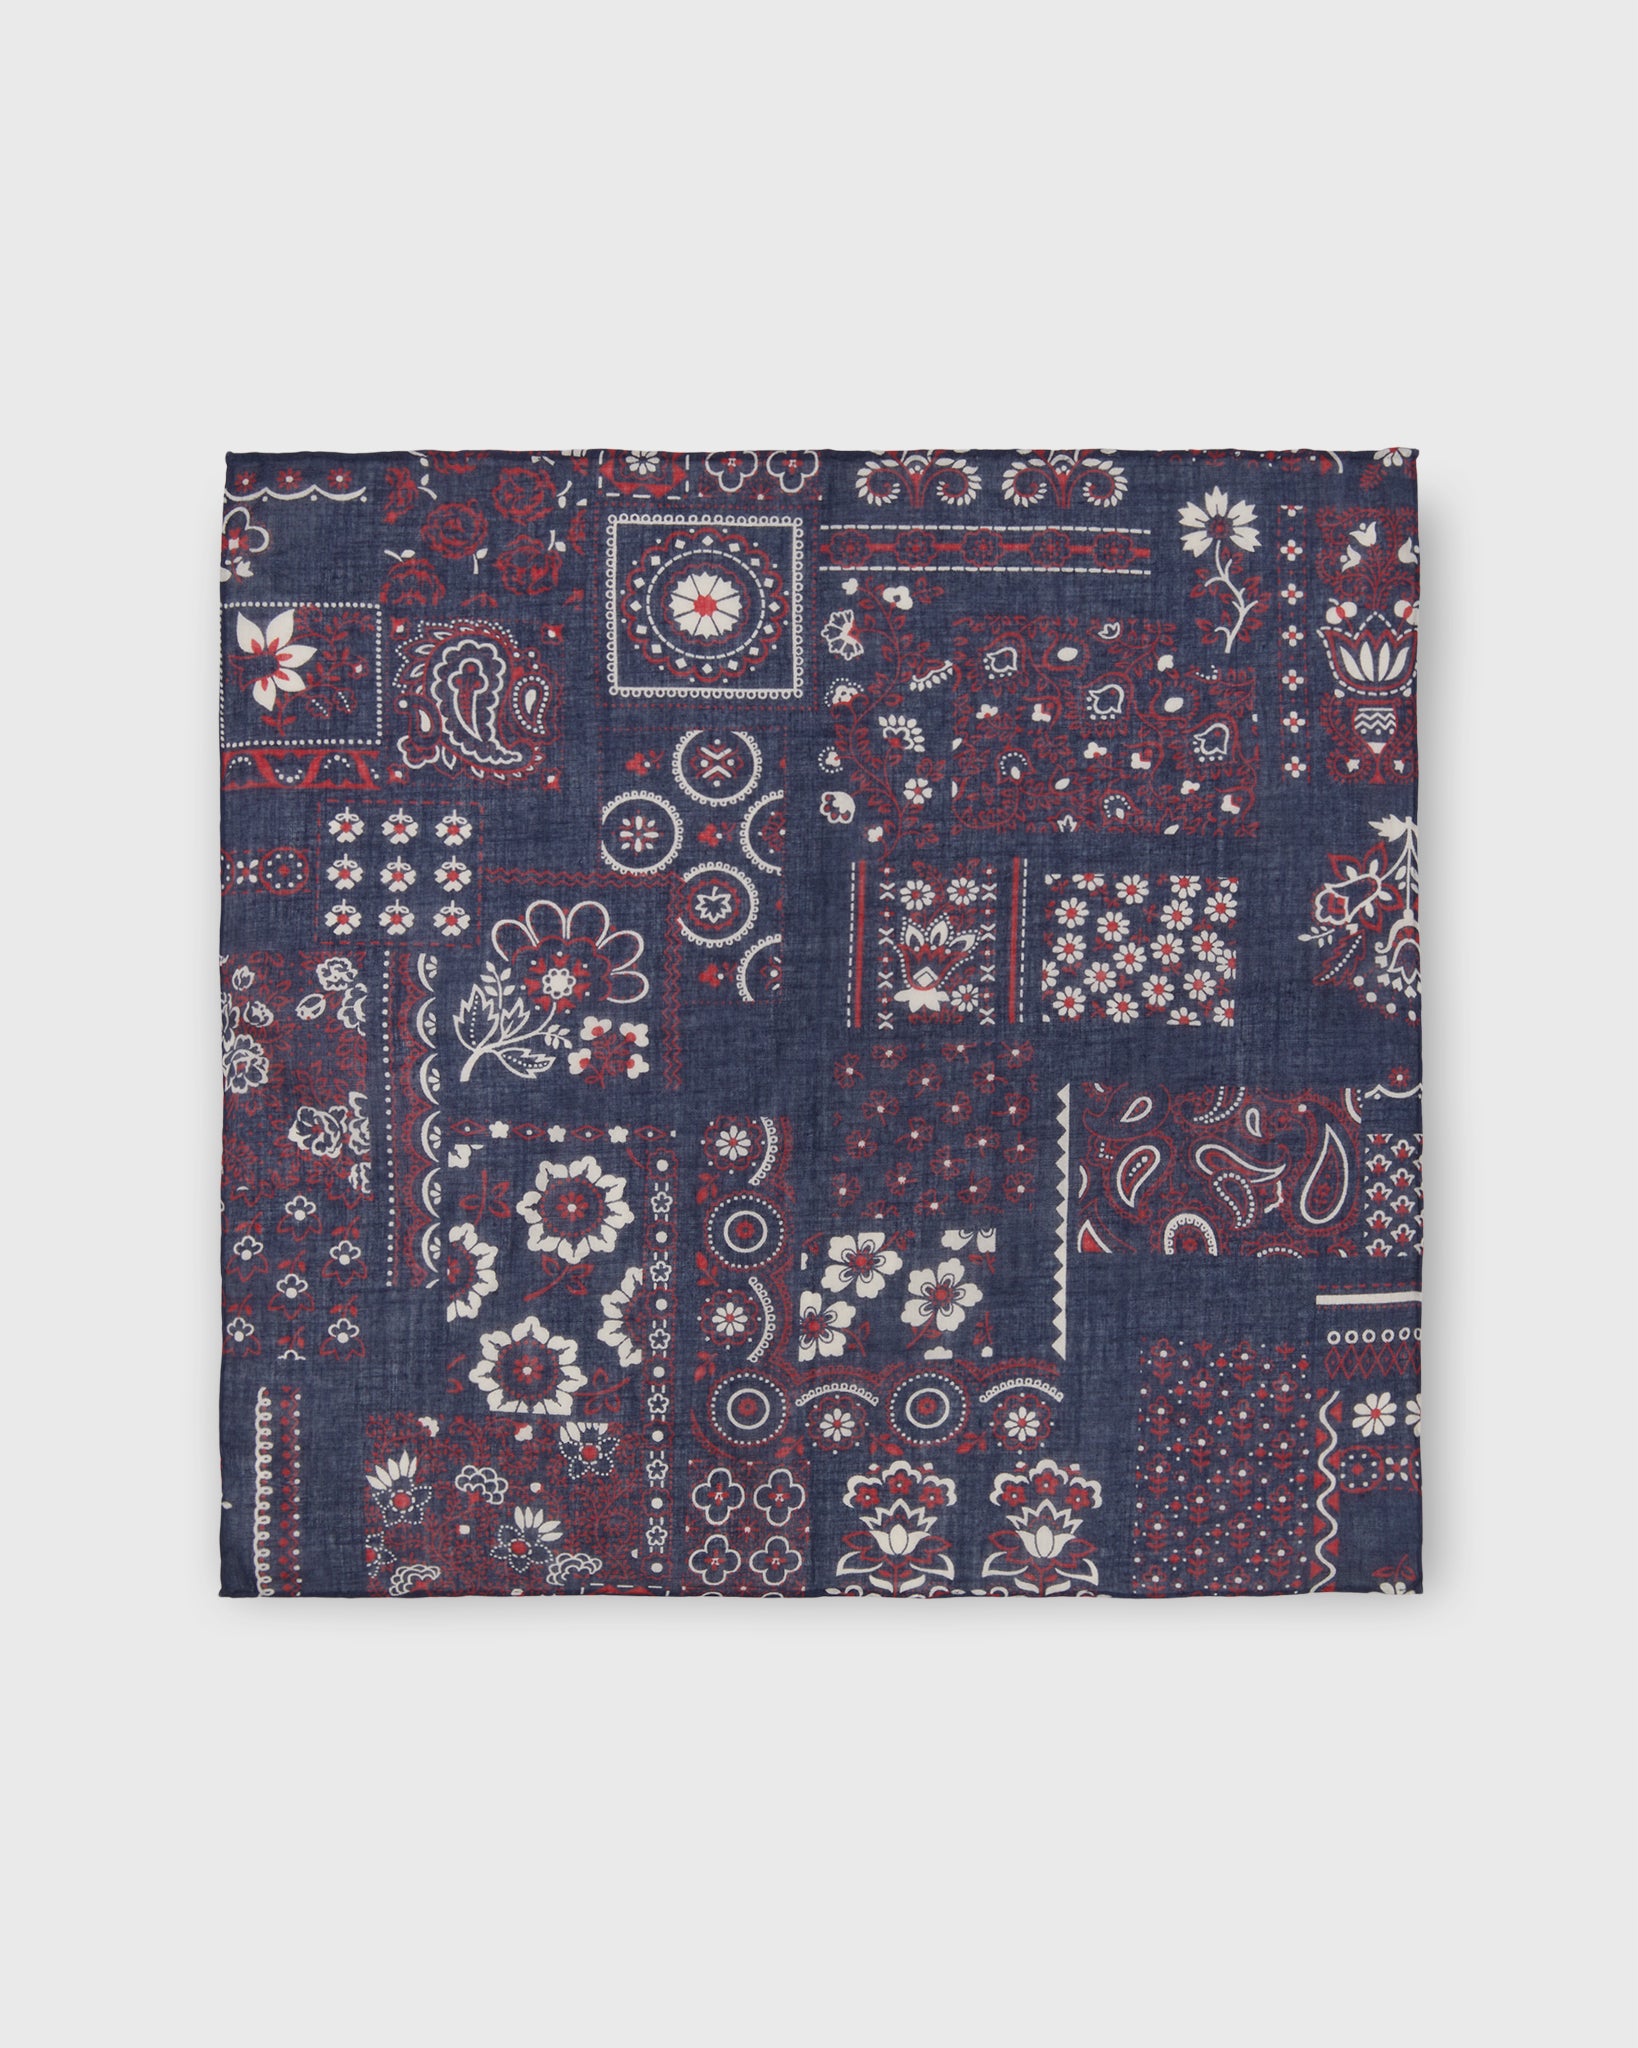 Cotton Print Pocket Square in Navy Patchwork Paisley